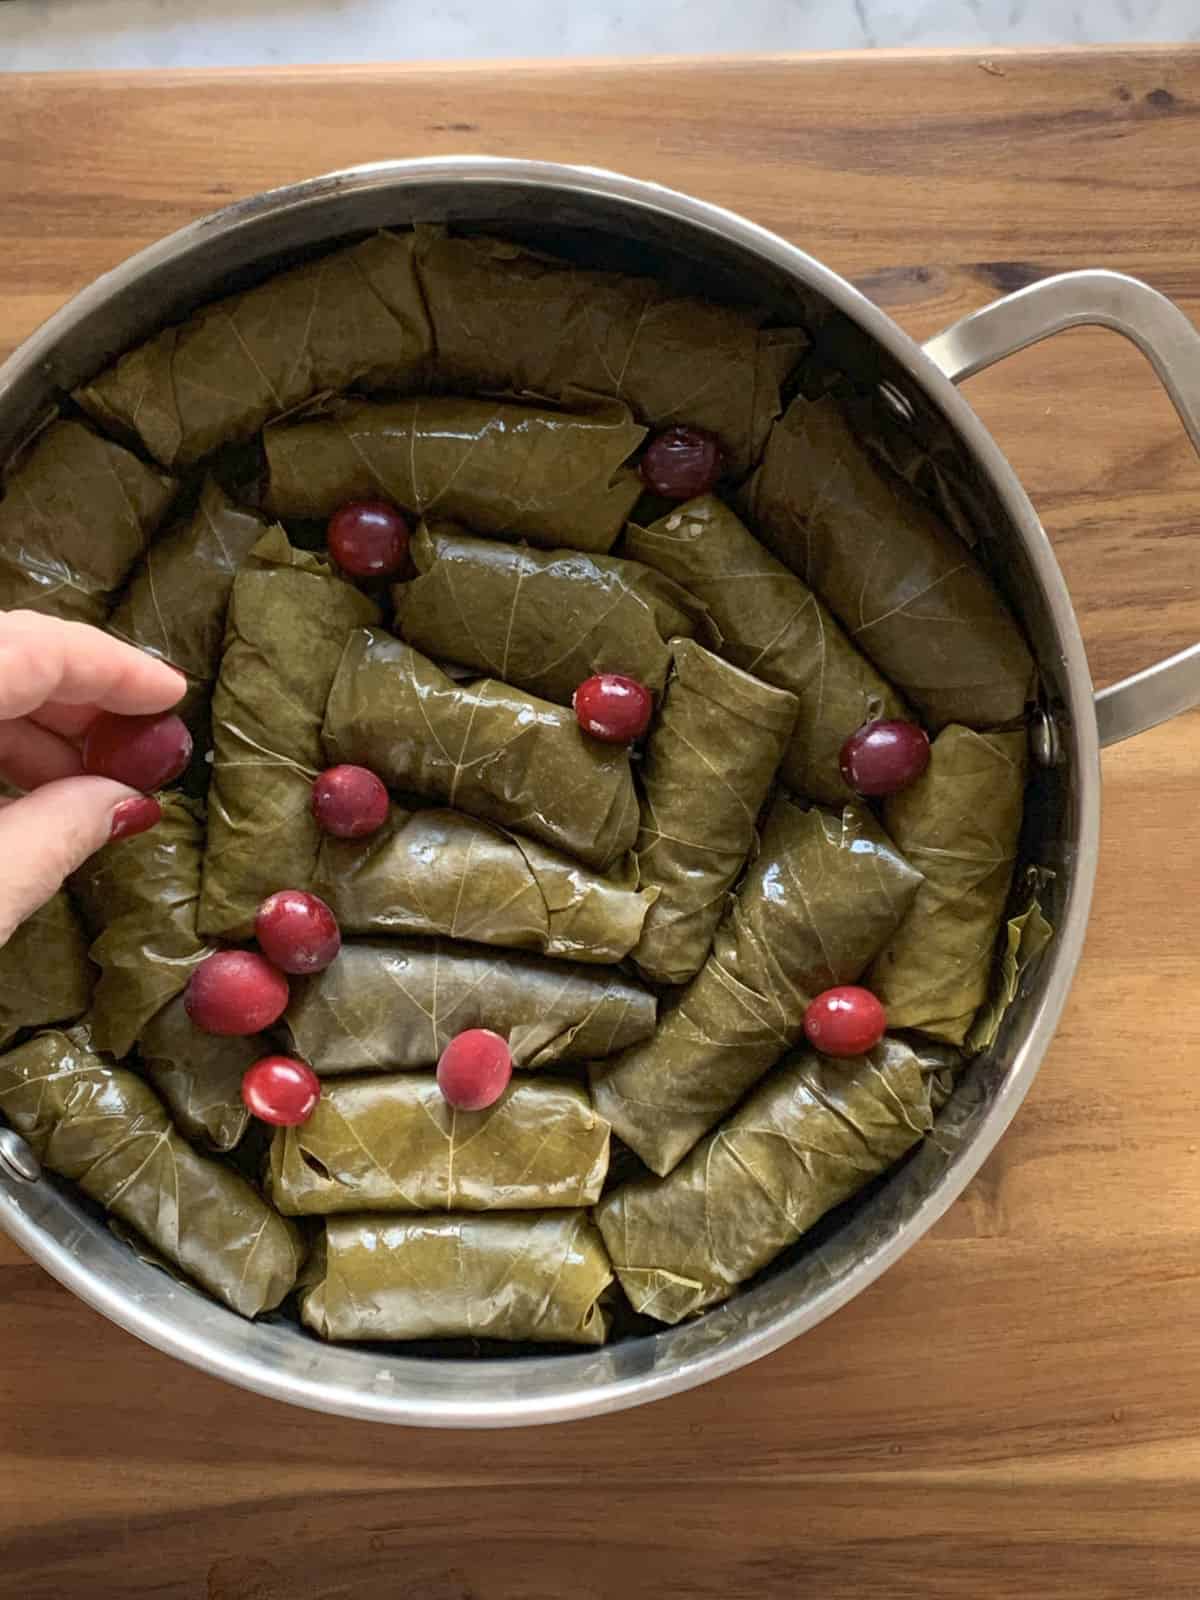 Tolma arranged in a cooking pan. 